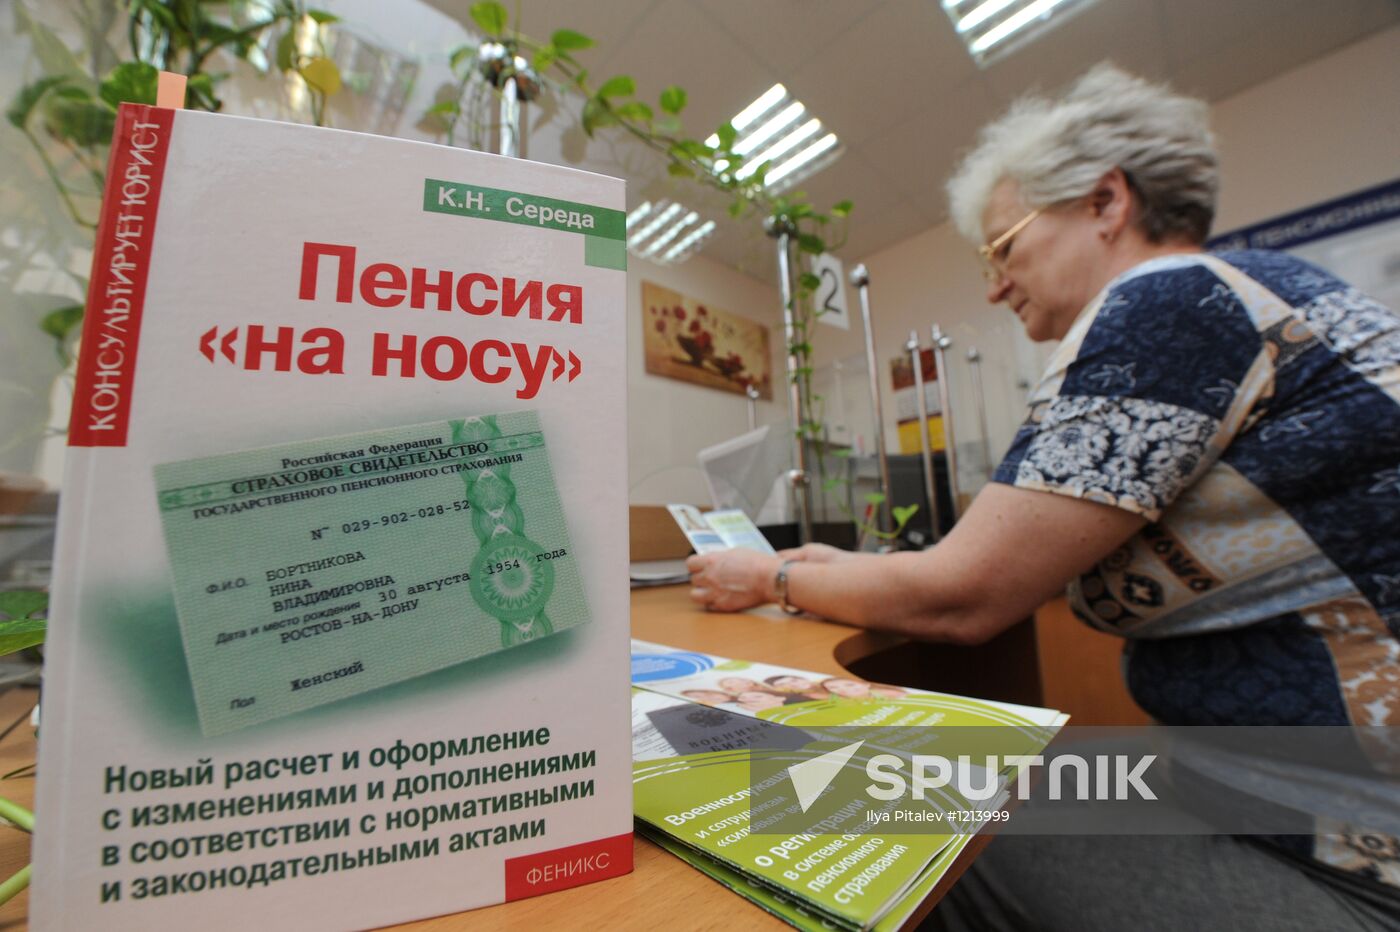 Moscow resident consults staff in Yakimanka St. pension office